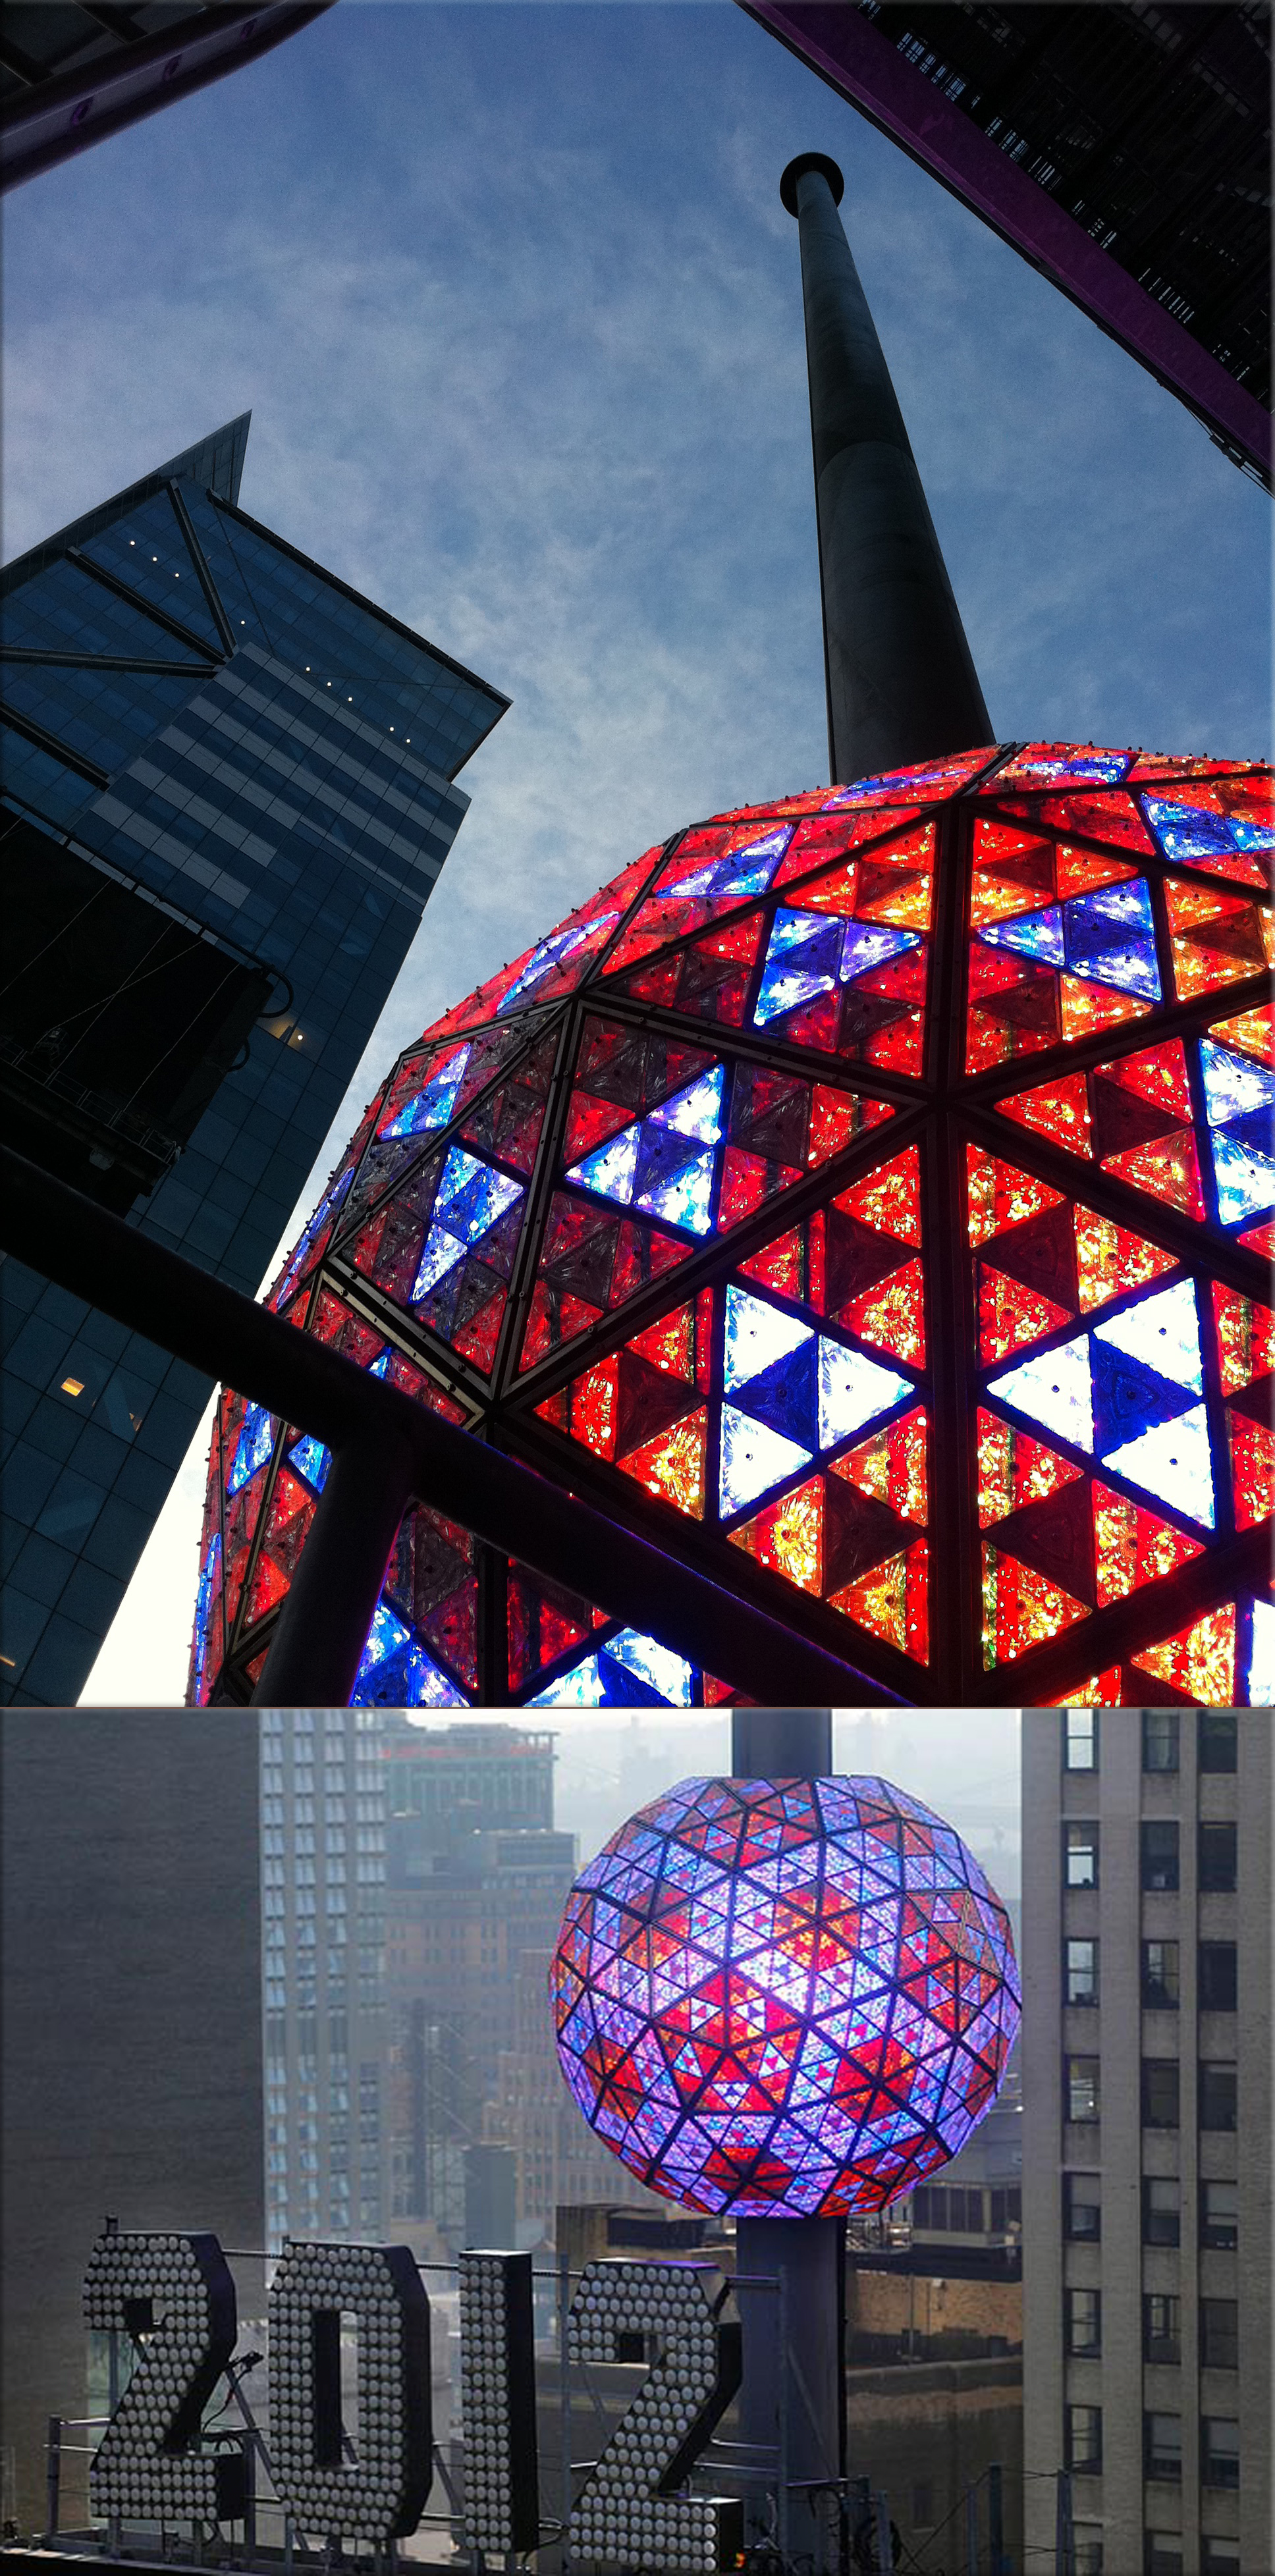 New Year's Eve celebration Times Square ball drop (test), in New York, New York